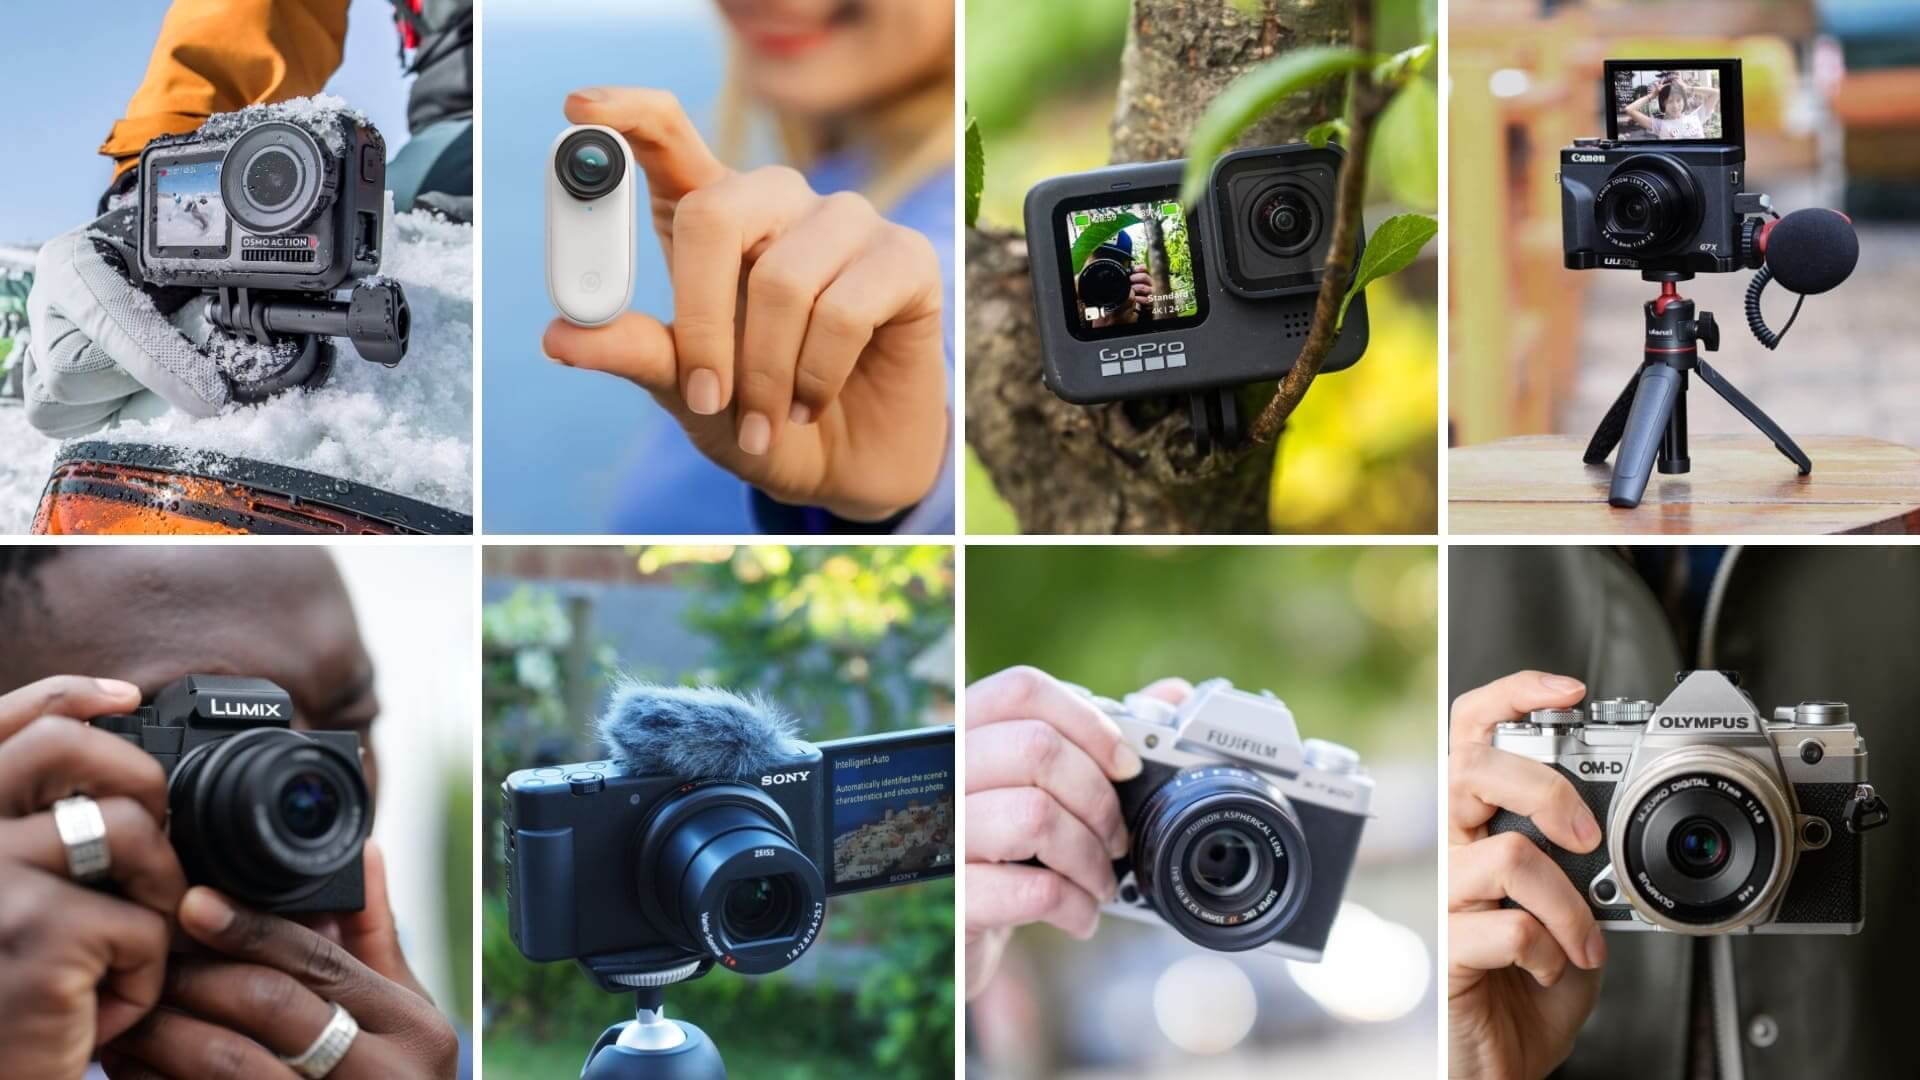 https://s.studiobinder.com/wp-content/uploads/2020/09/Best-Camera-for-YouTube-Videos-%E2%80%94-Prices-Specs-Top-Picks-Featured.jpg